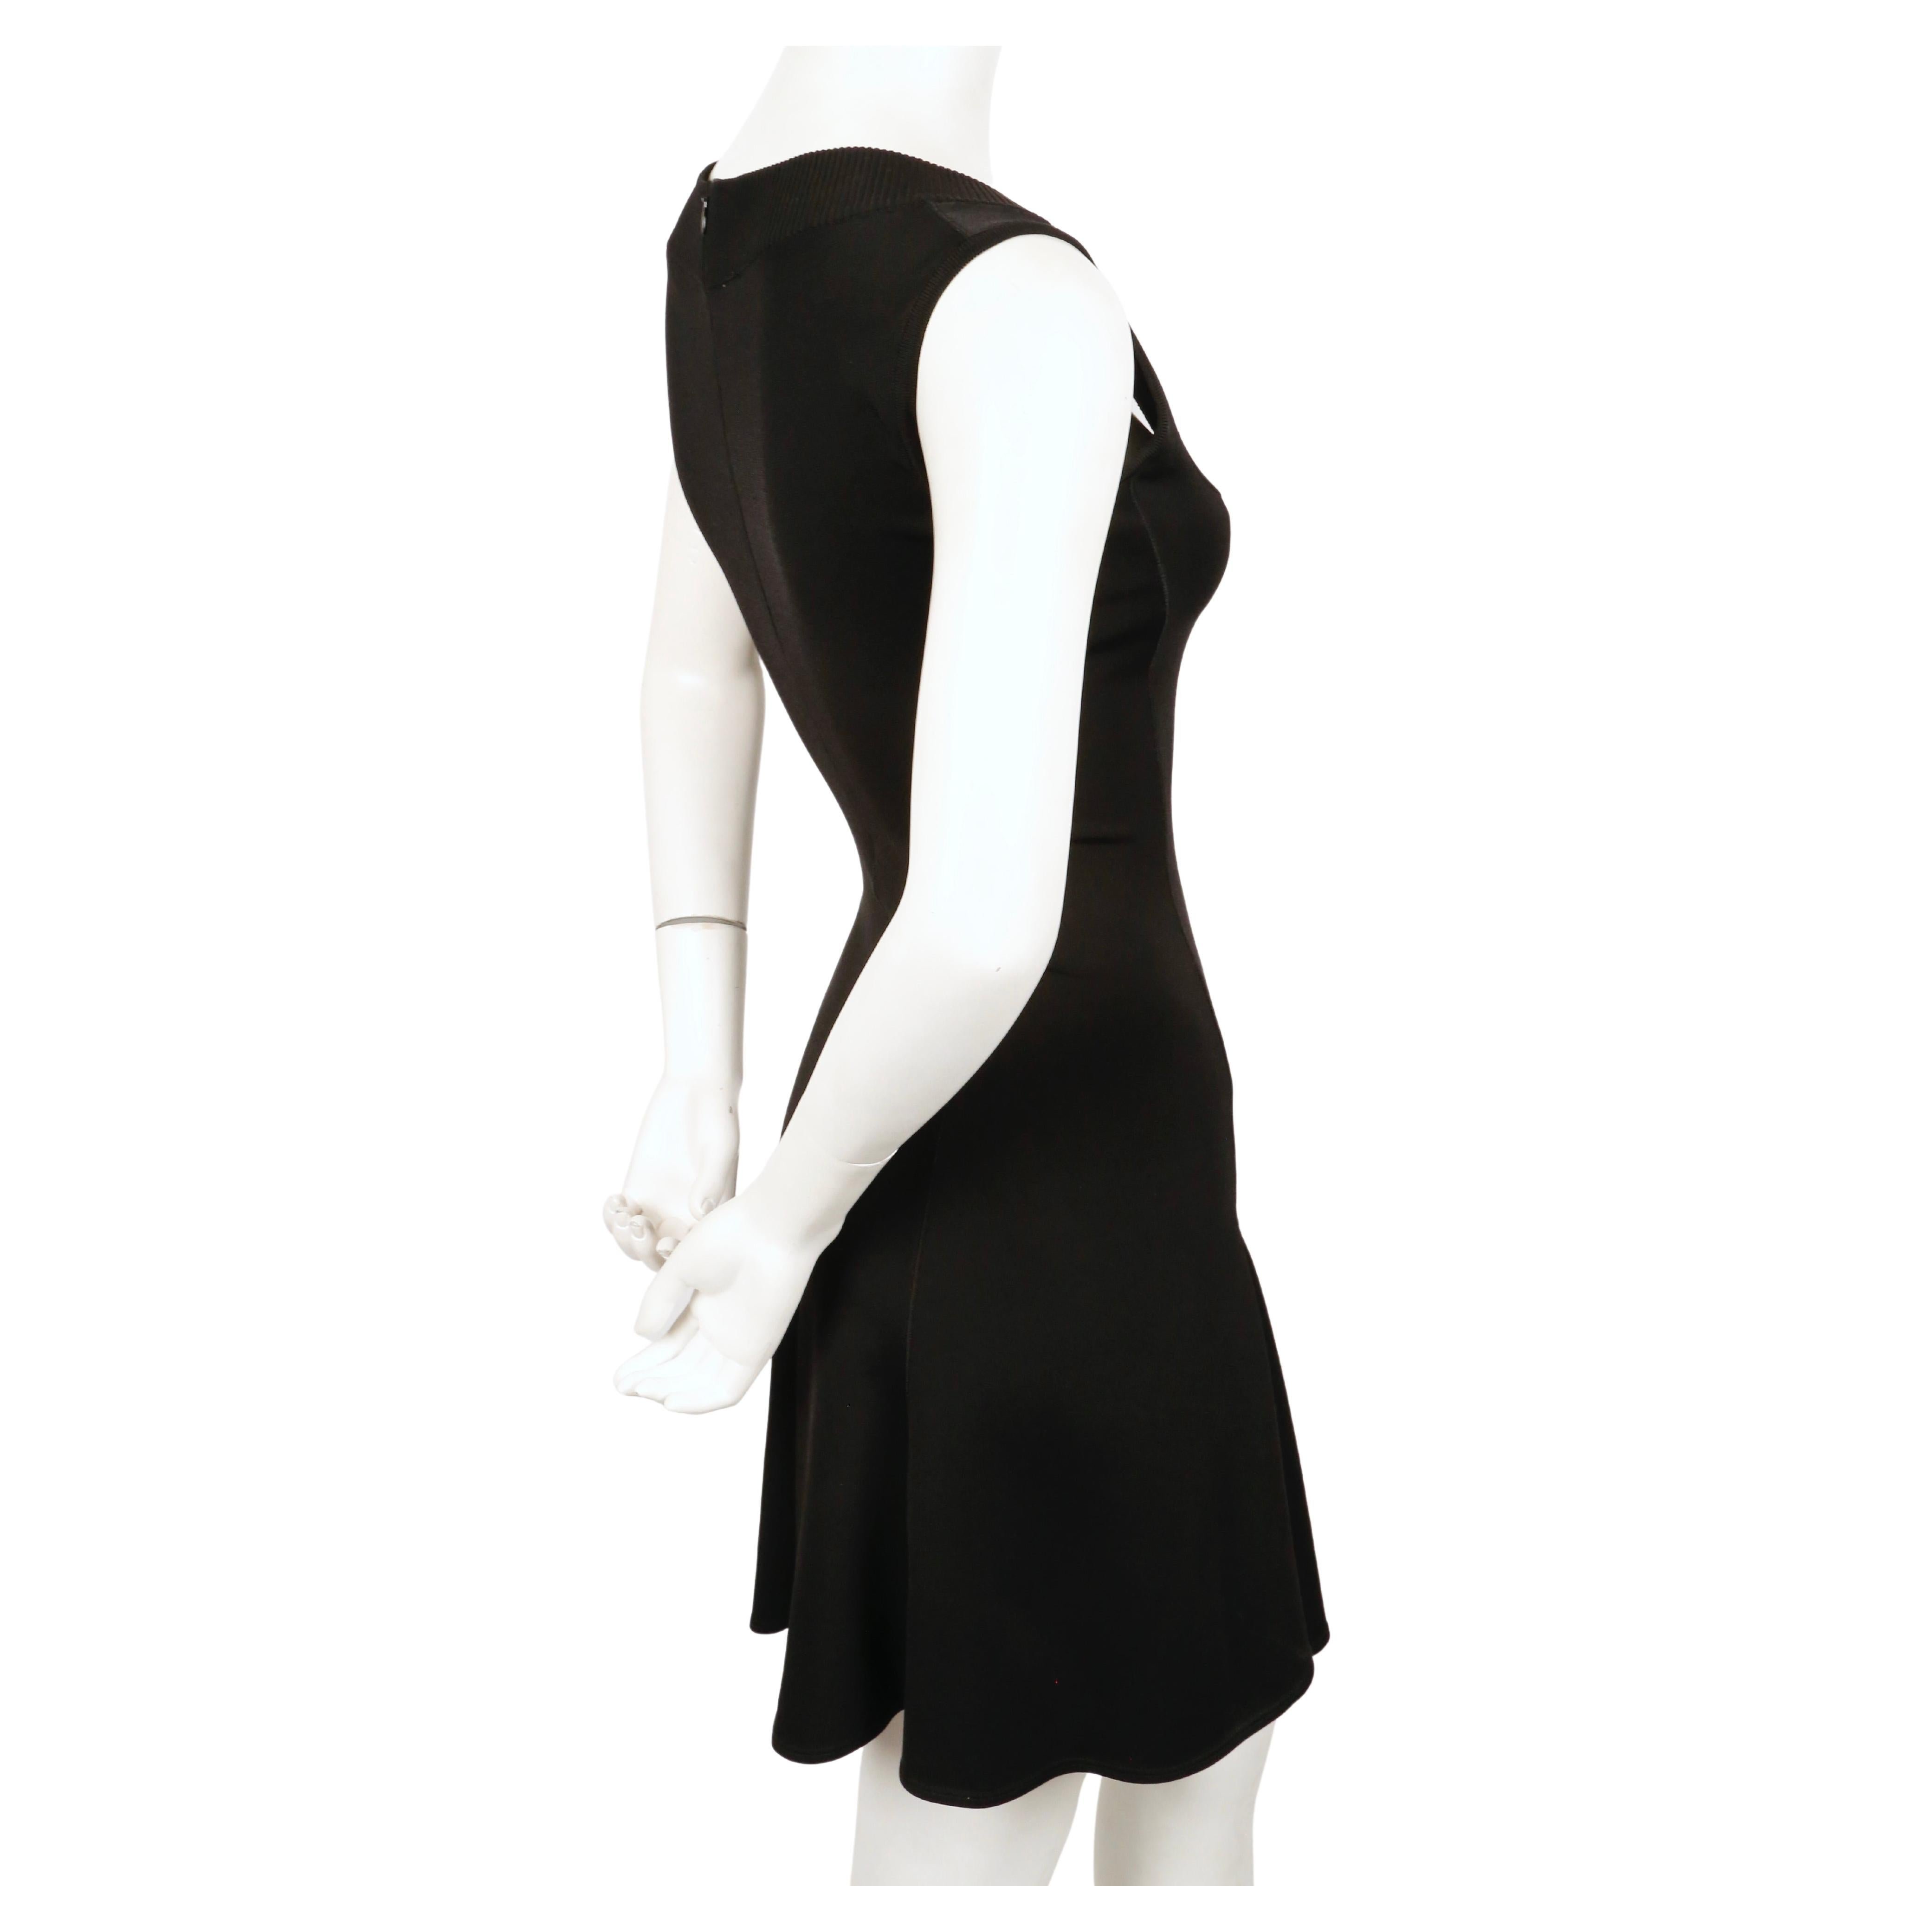 Jet-black, flared, sleeveless dress  designed by Azzedine Alaia dating to the early 1990's. No size label although this best fits an XS or  S. Approximate measurements (unstretched): bust 30